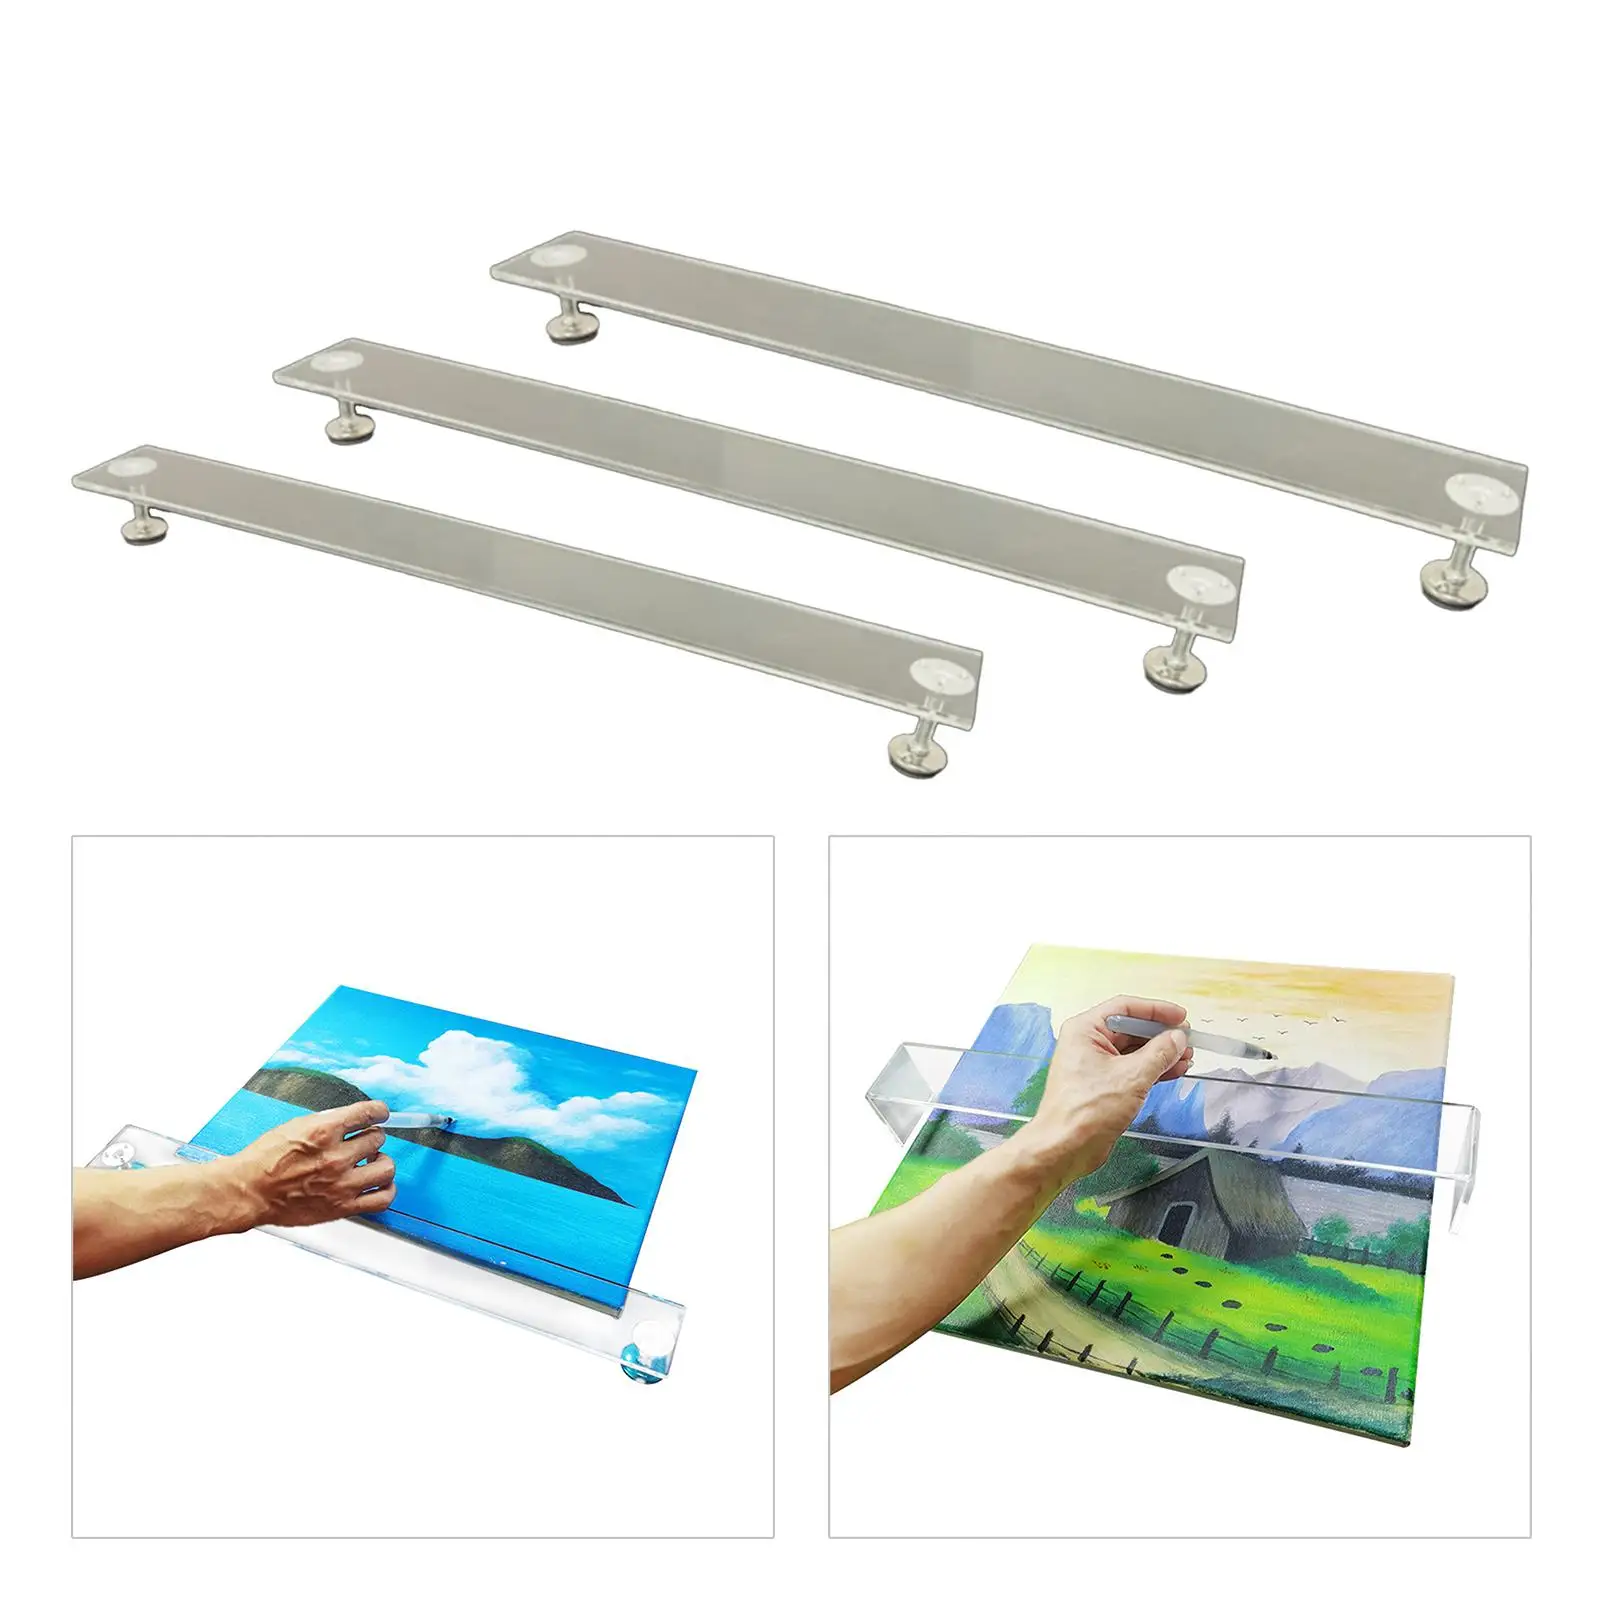 Artist Leaning Bridge Acrylic Sketching Transparent Shelf Palm Rest Wrist Protection Drawing Clear Panel Hand Rest Painters Tool